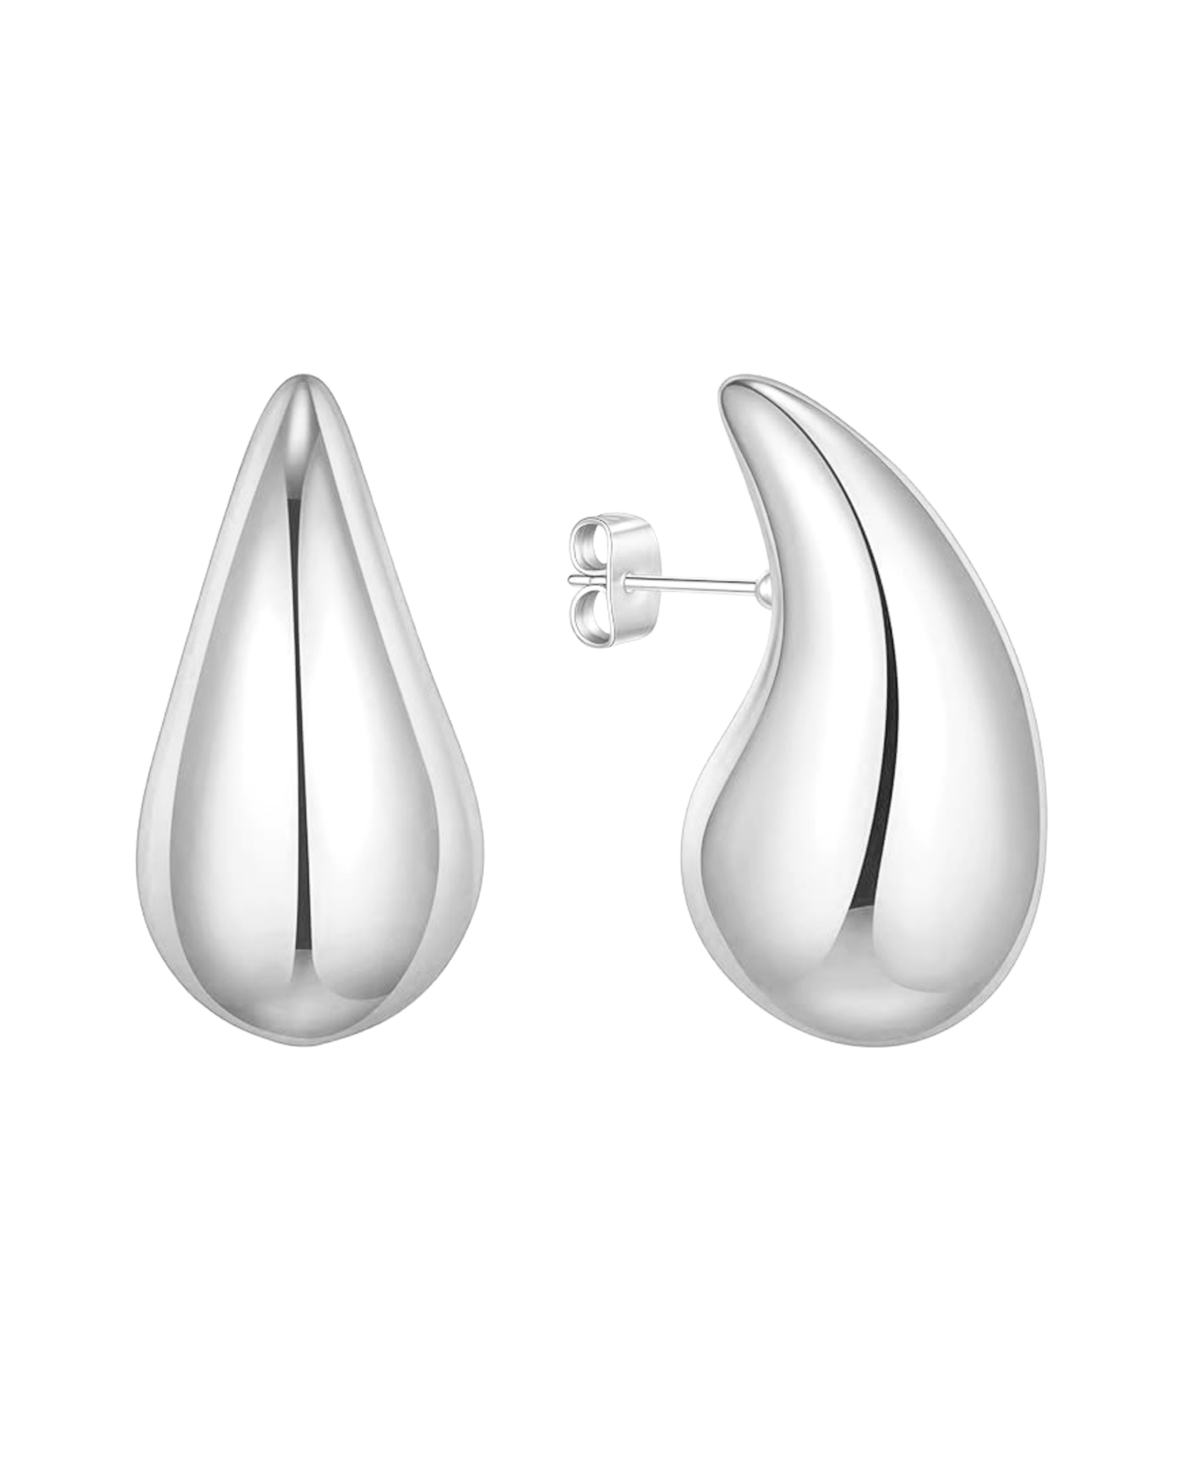 Shop And Now This 18k Gold Plated Or Silver Teardrop Small Teardrop Stud Earrings